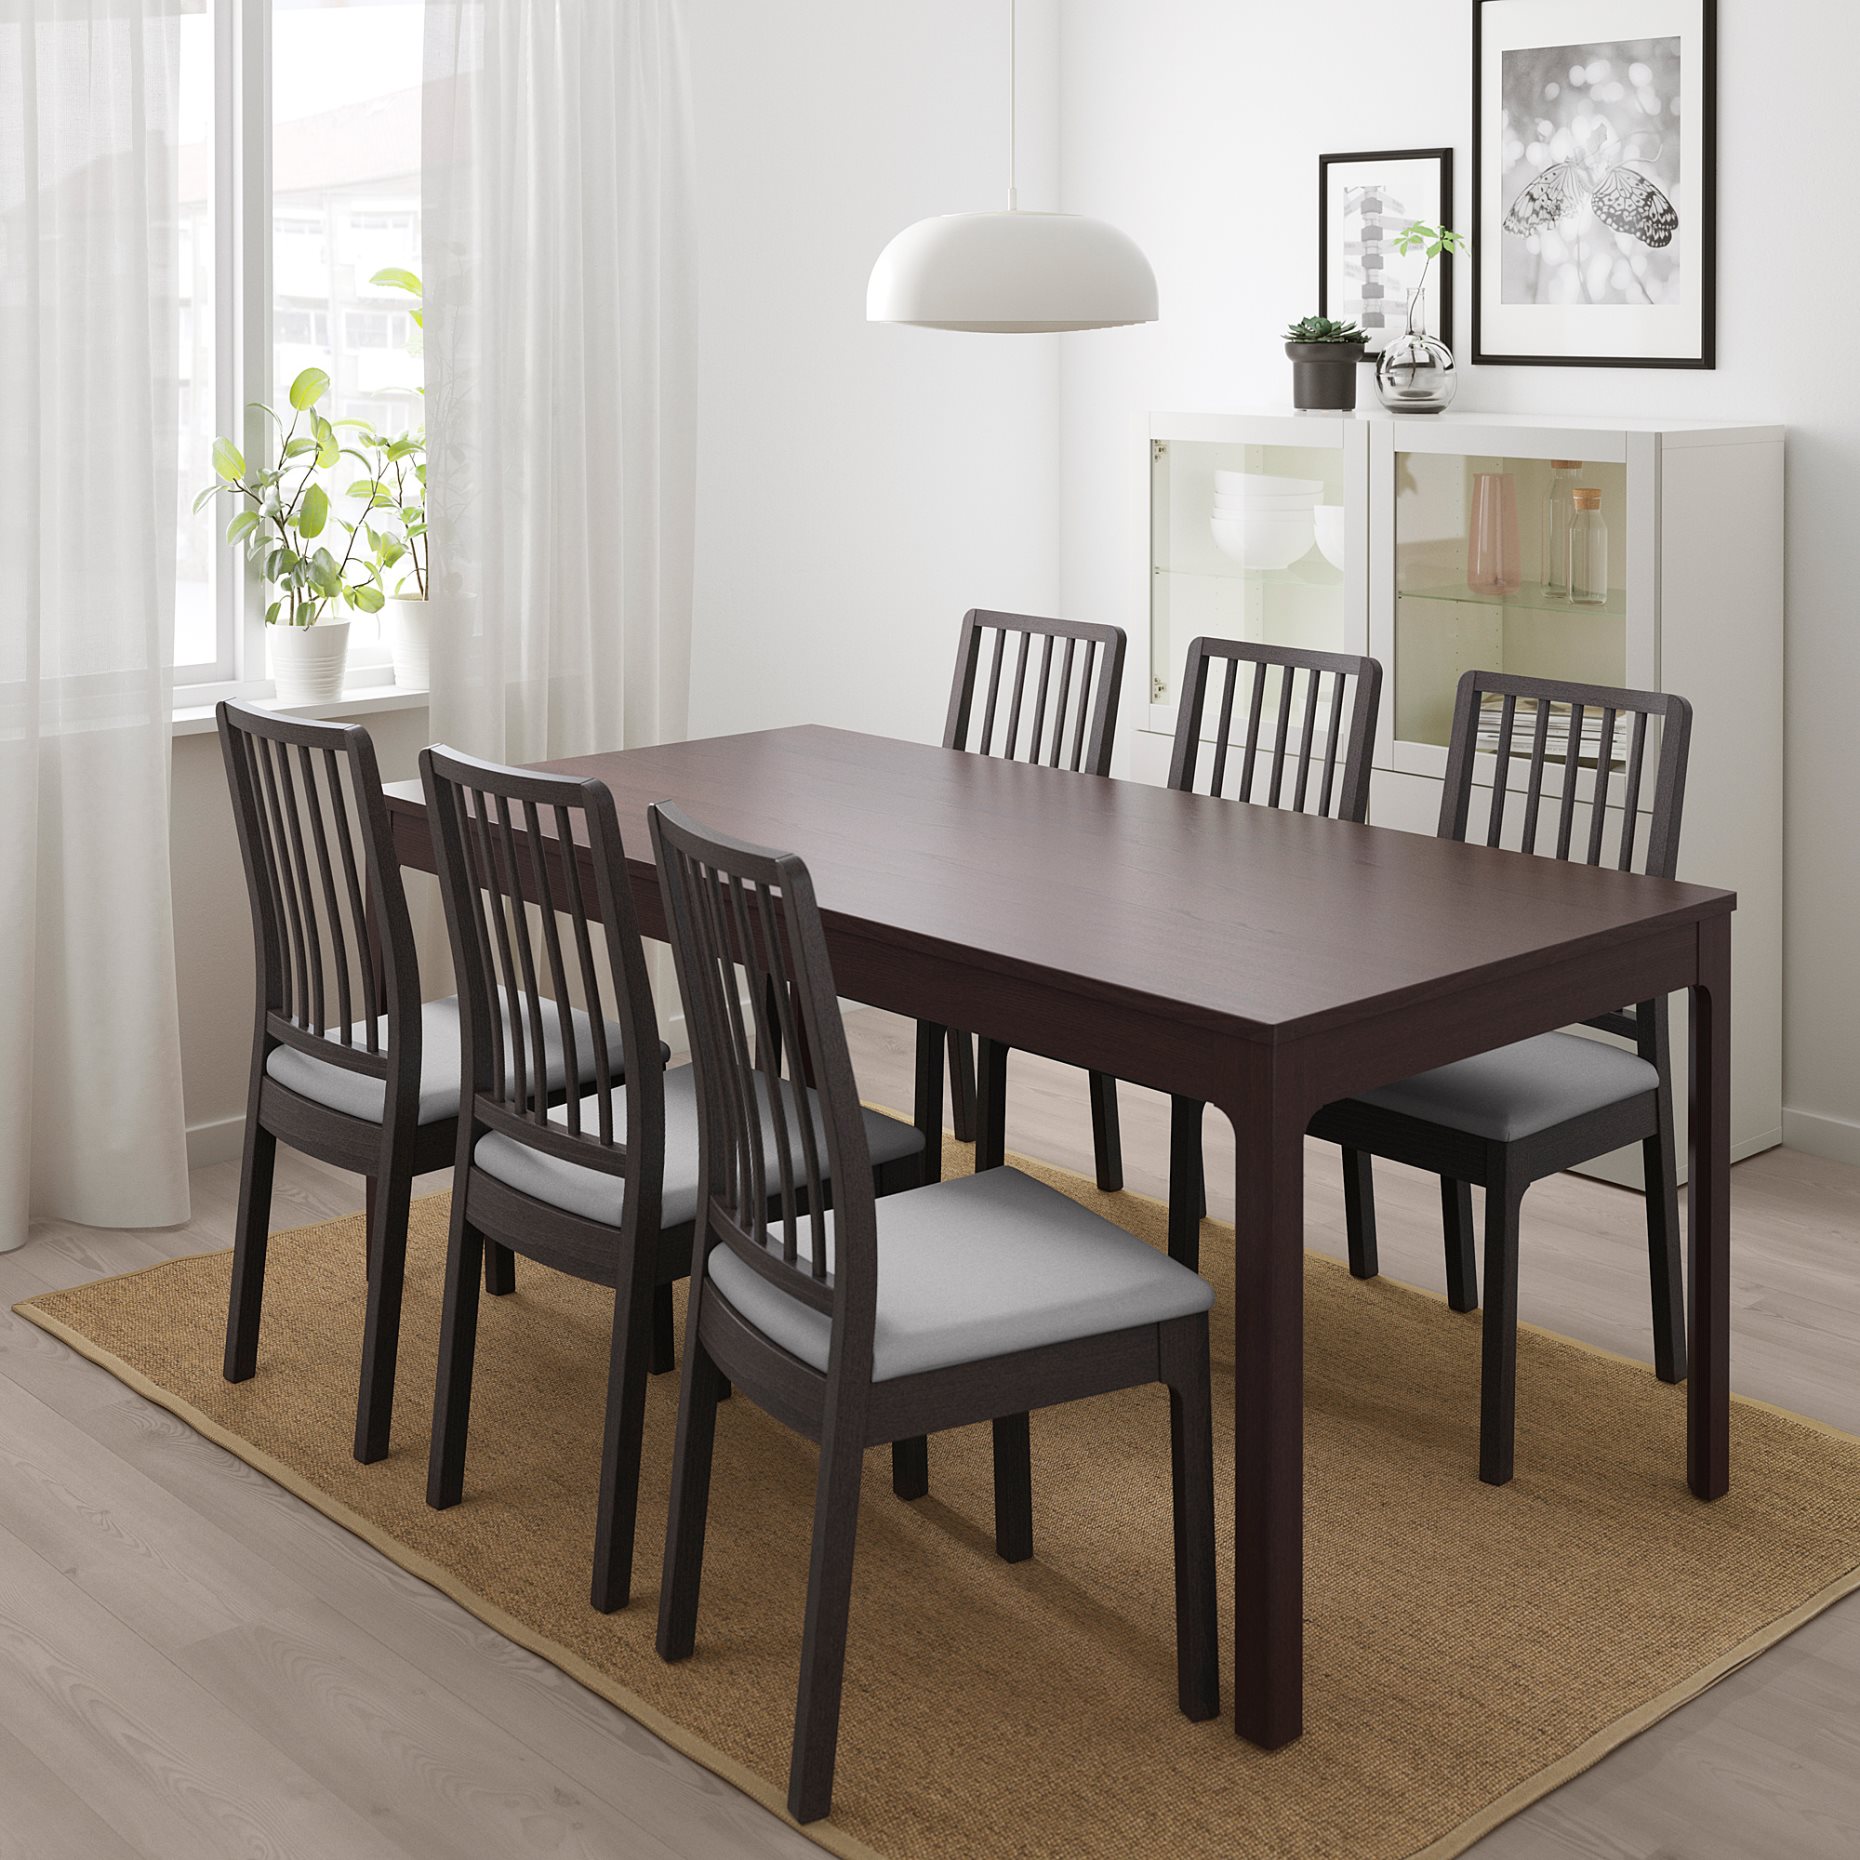 EKEDALEN/EKEDALEN, table and 6 chairs, 180/240 cm, 392.795.67